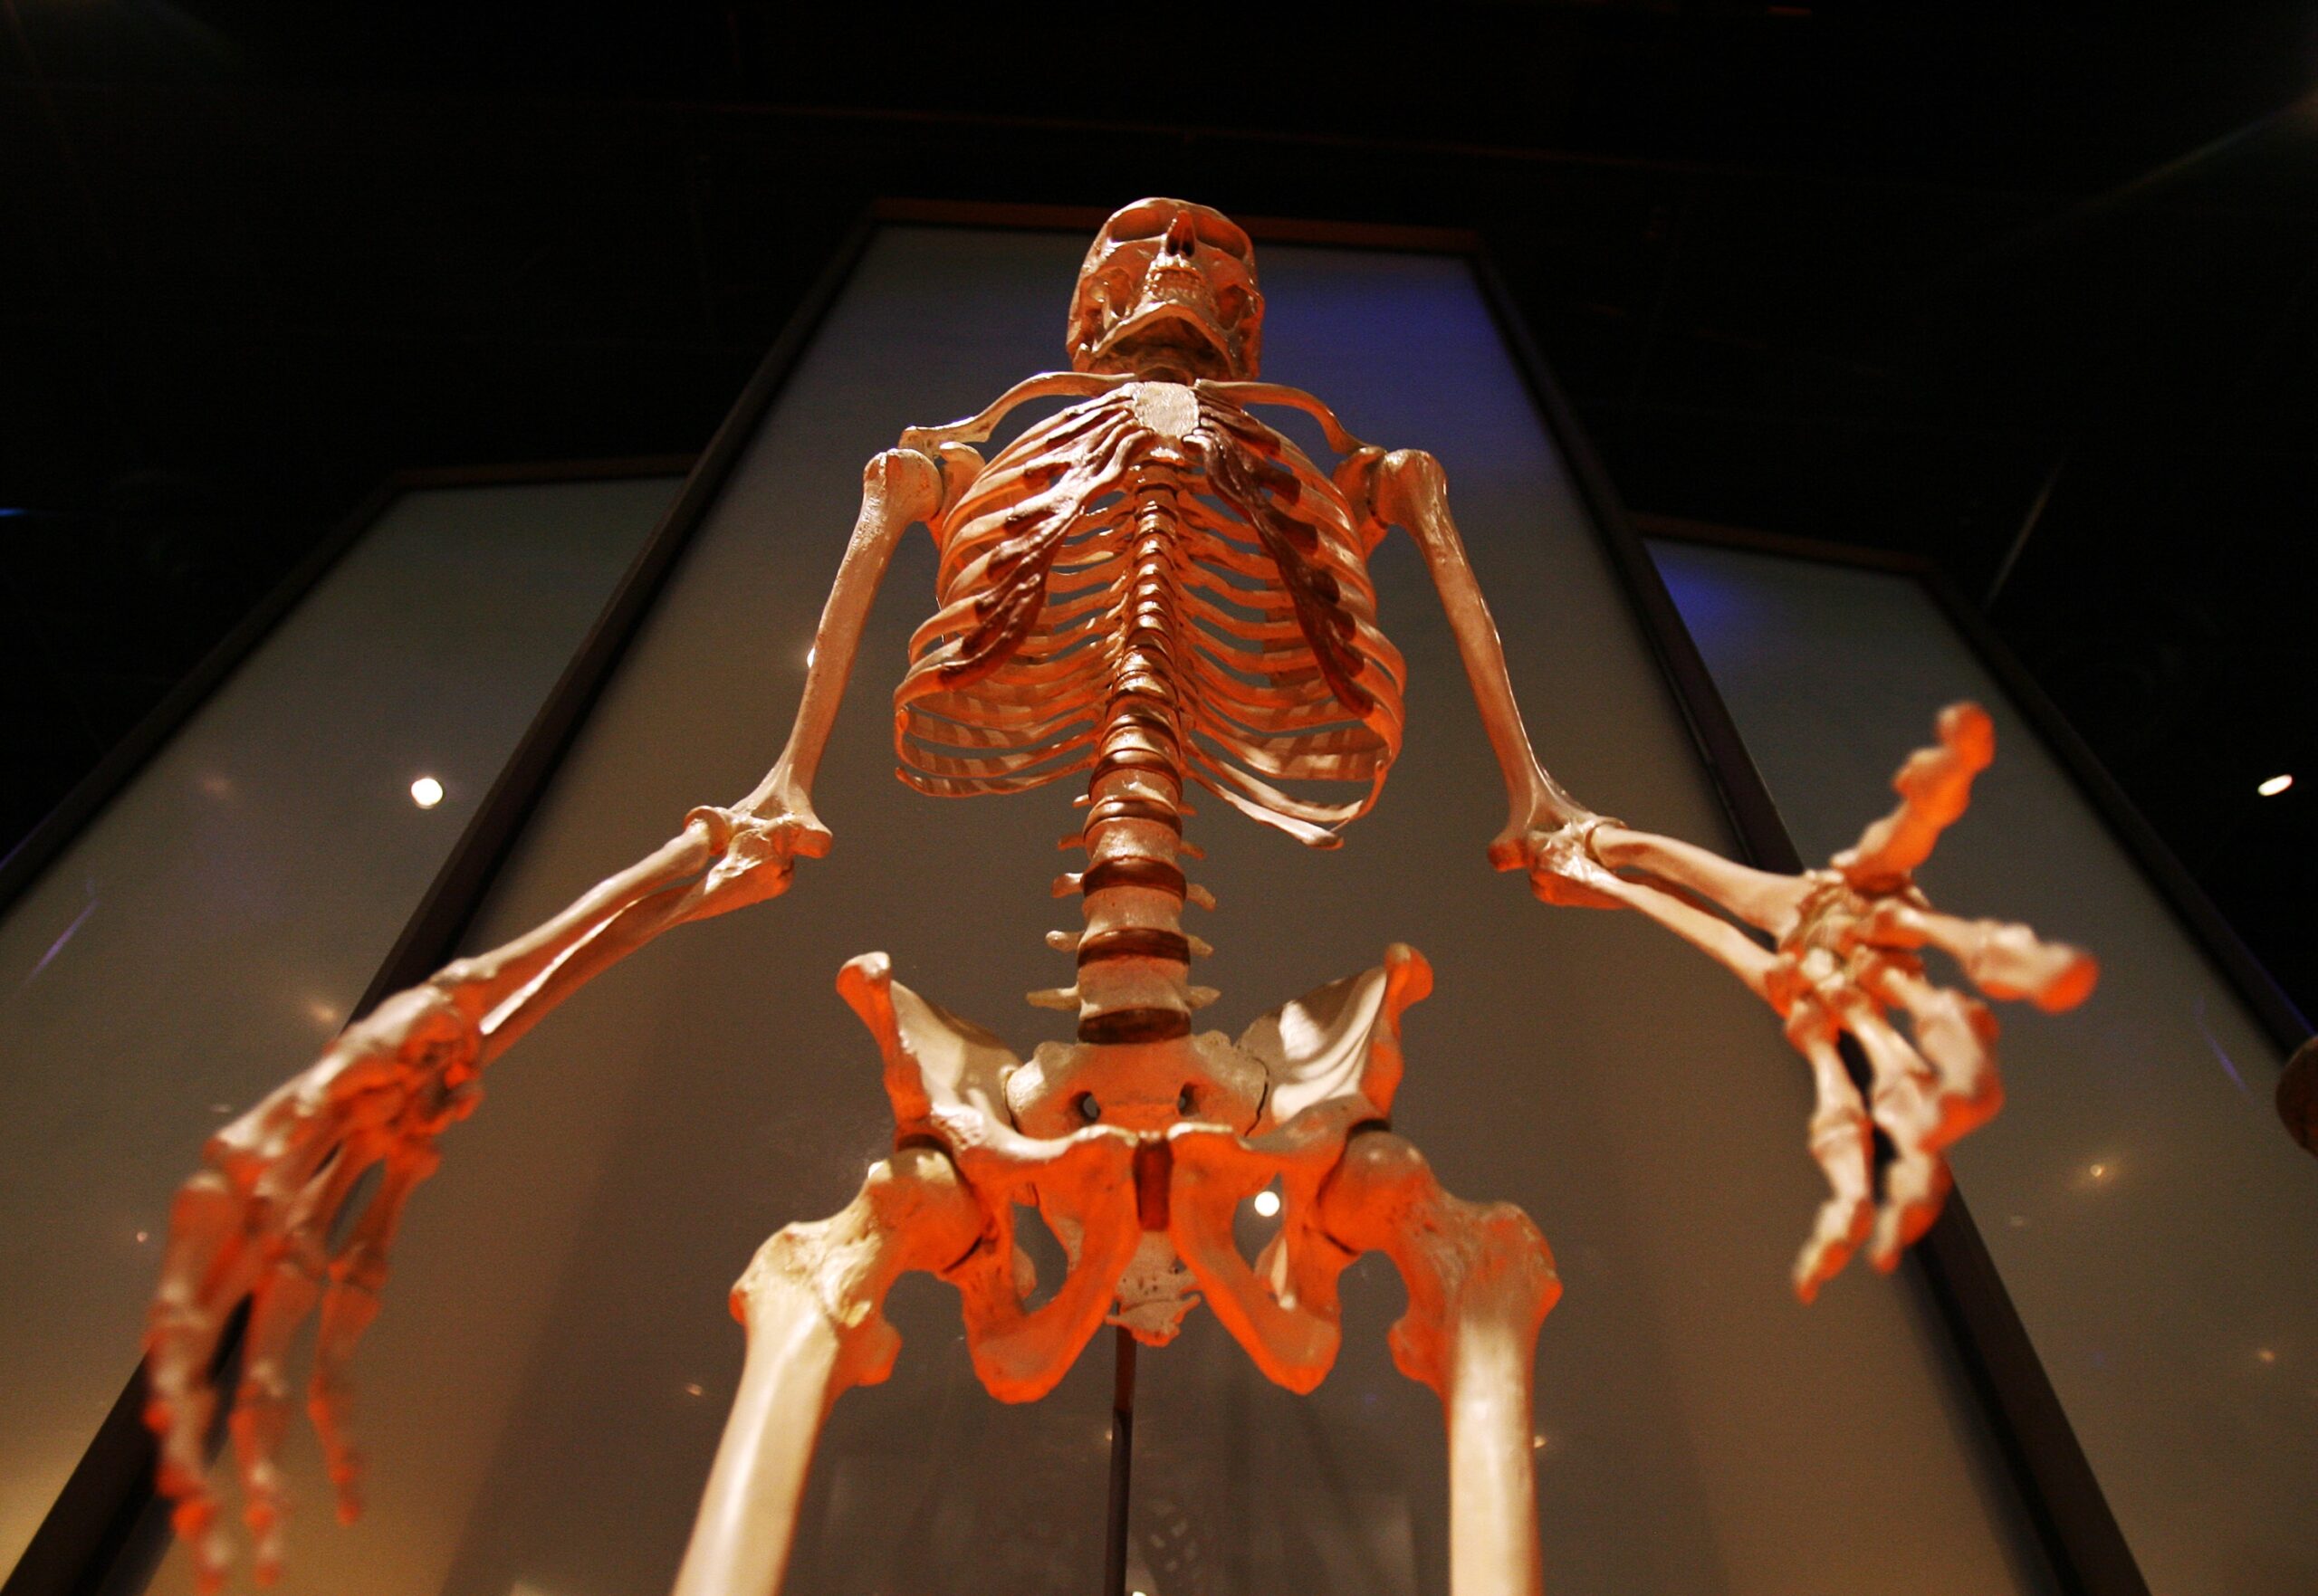 An up-close view of a human skeleton